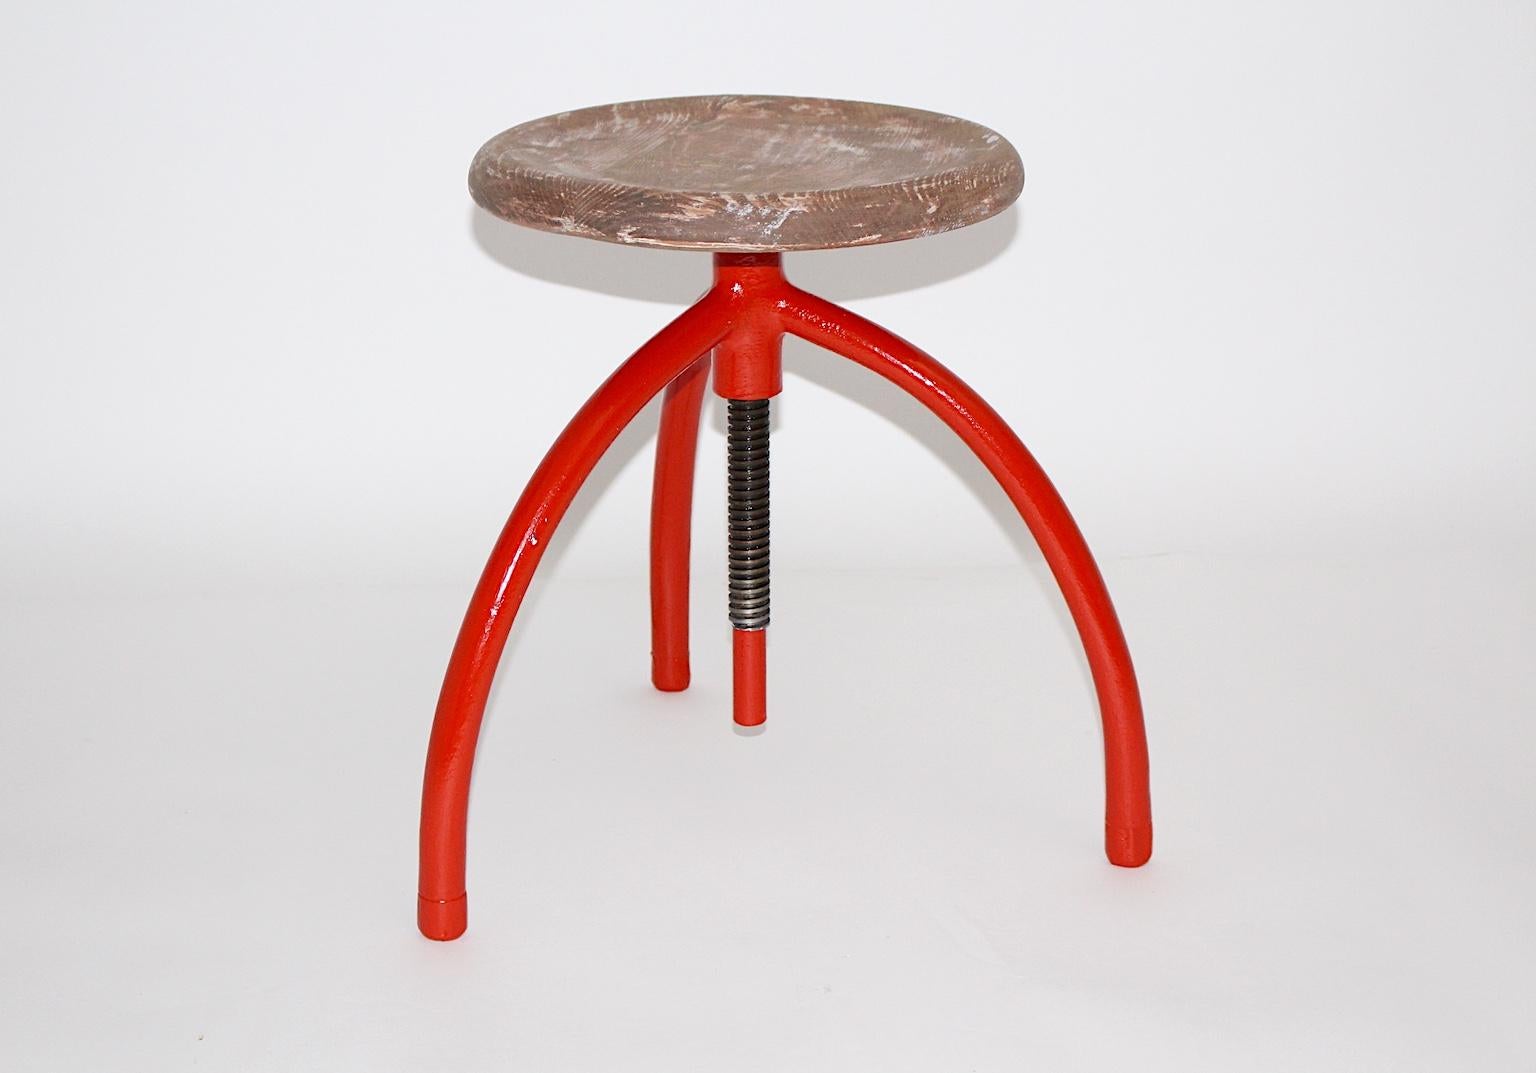 A vintage red metal swiveling stool, which was designed by Margarete Schuette-Lihotzky, 1920s.
Margarete Schuette-Lihotzky, (1897-2000).
Margarete Schuette-Lihotzky was one of the first female architects and studied under Oskar Strnad and Heinrich